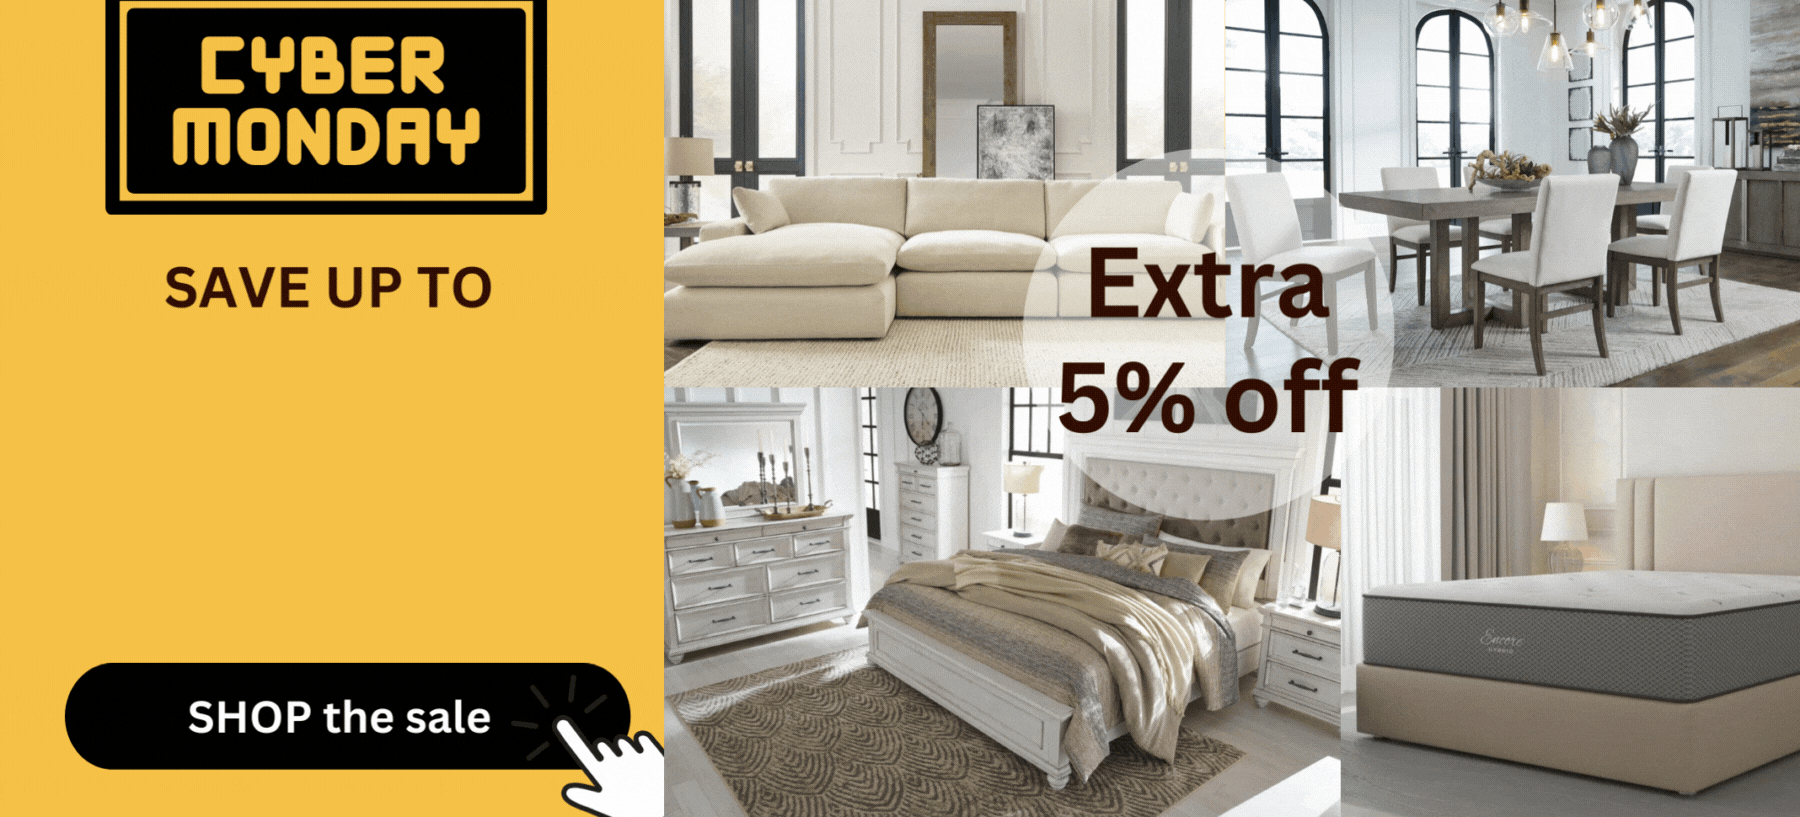 cyber monday furniture deals. best price guarantee.extra 5% off